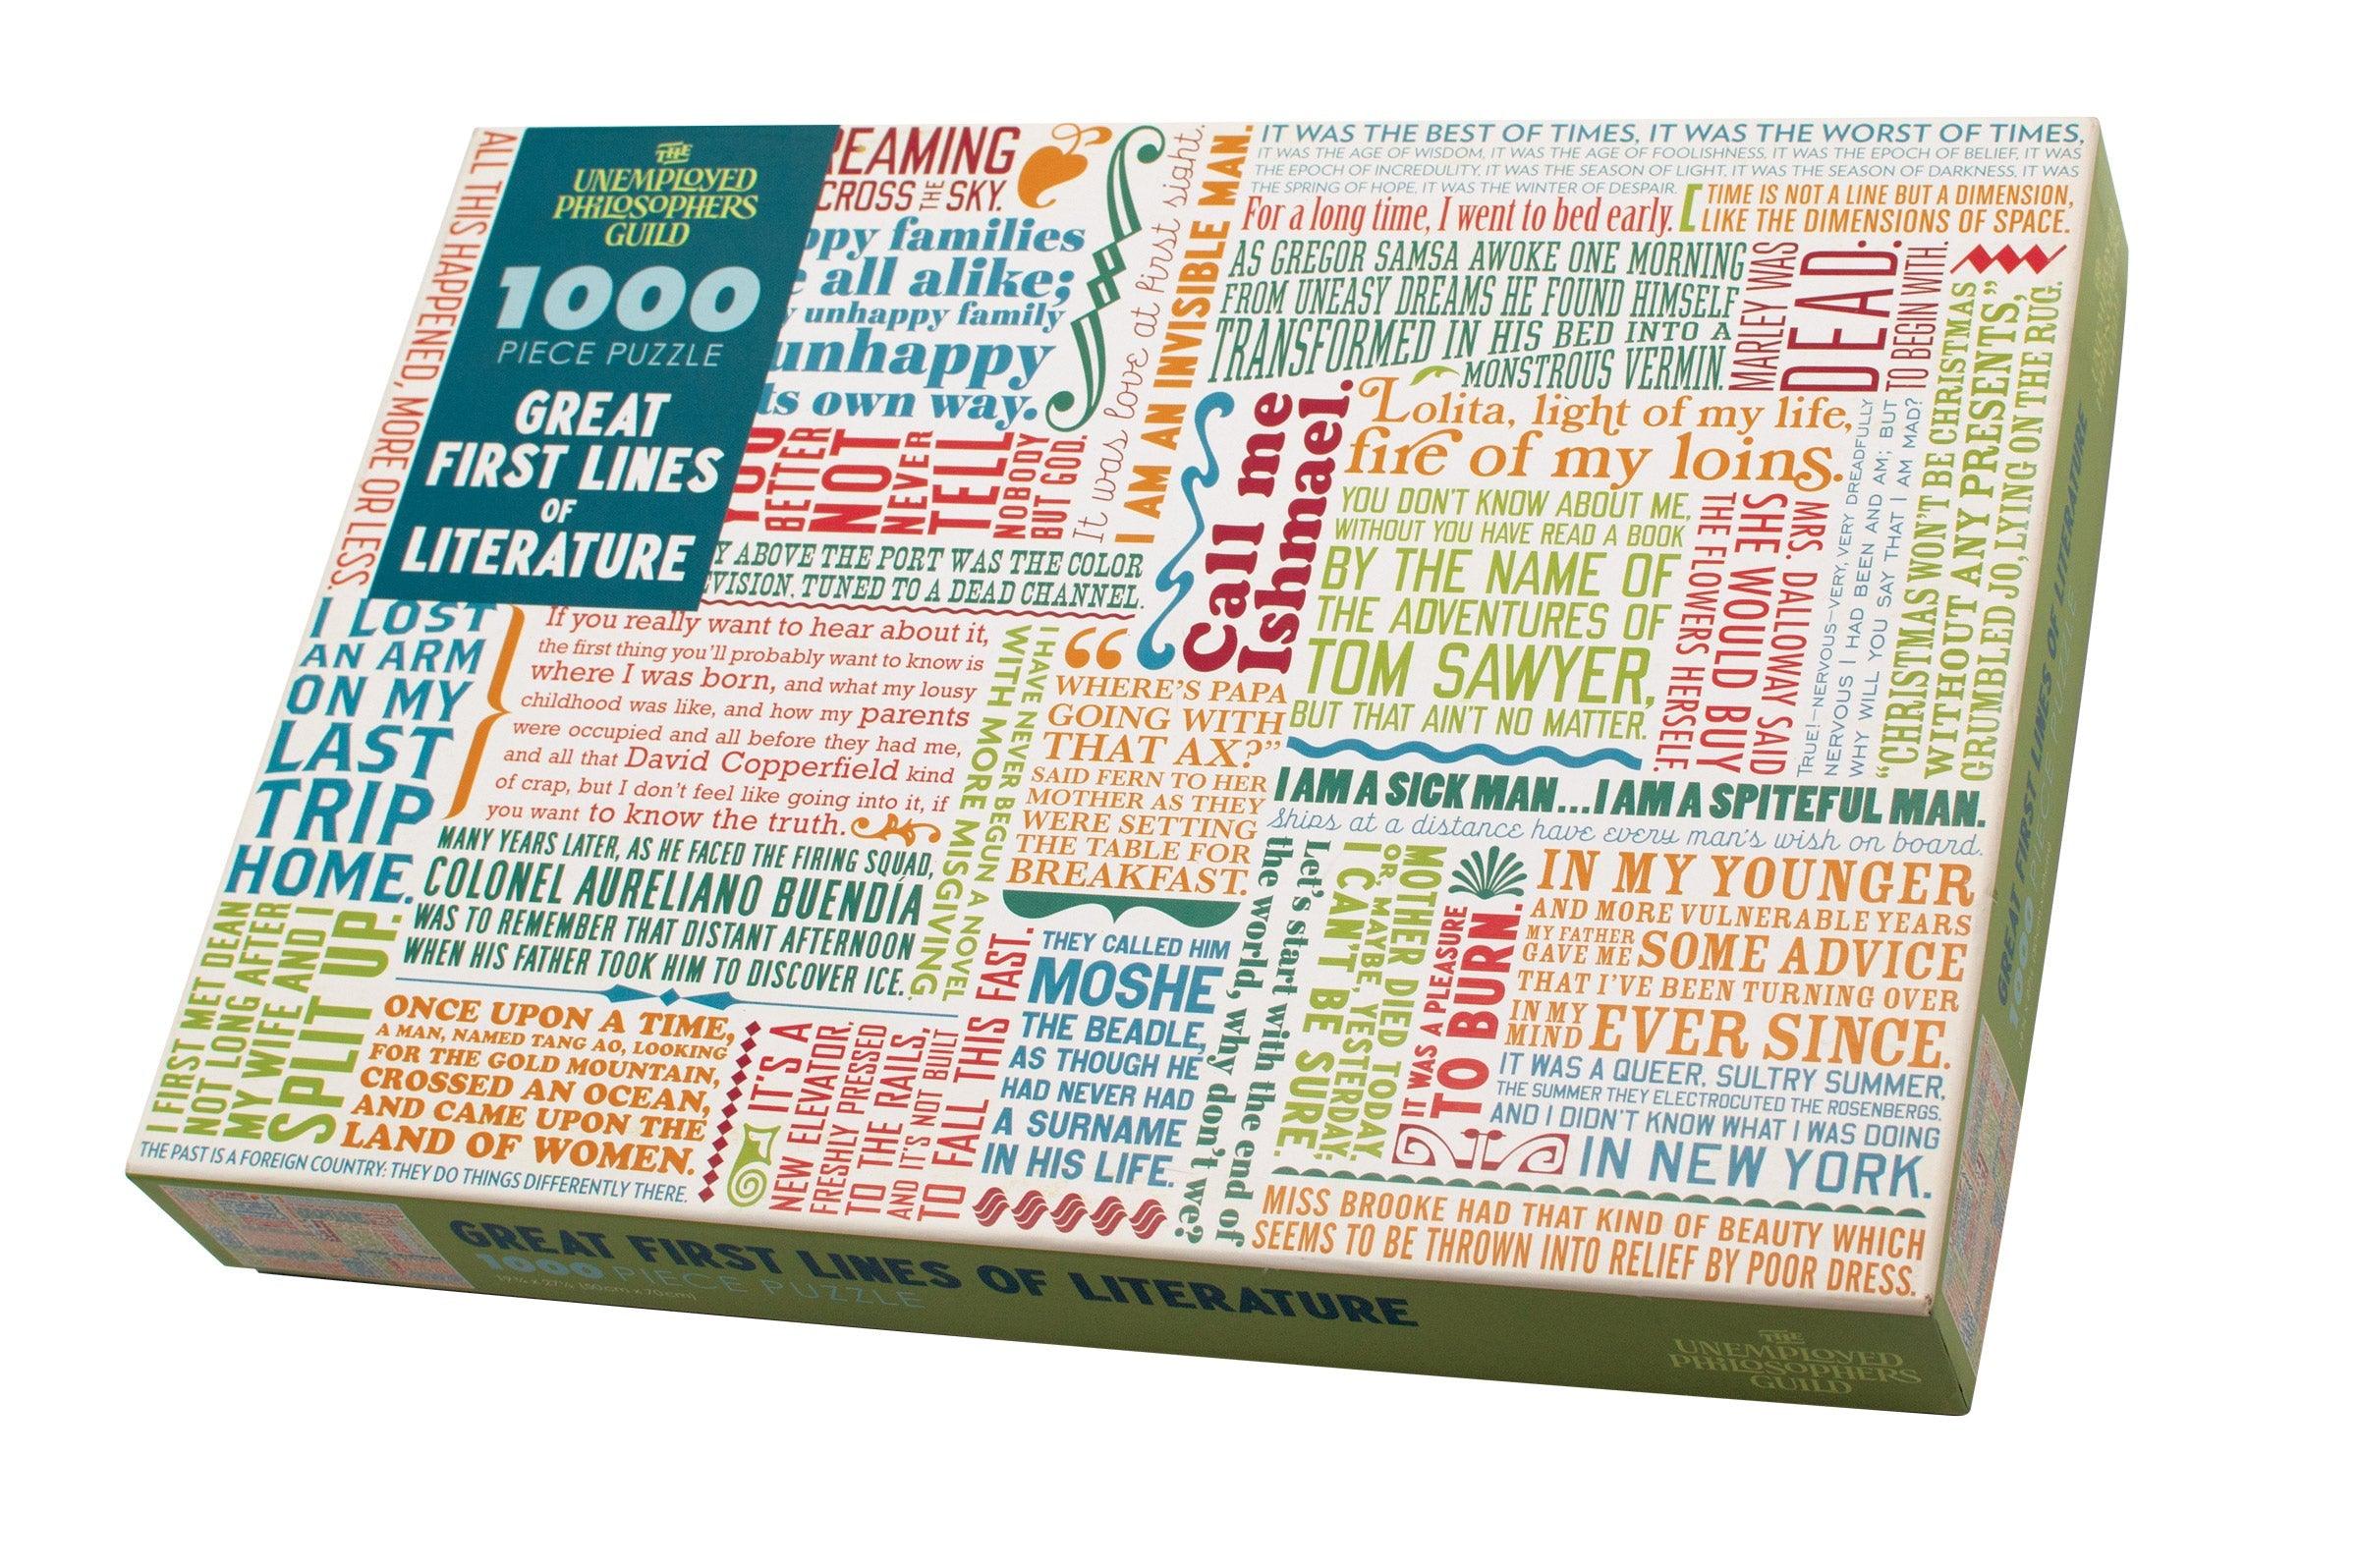 Product photo of First Lines of Literature Jigsaw Puzzle, a novelty gift manufactured by The Unemployed Philosophers Guild.